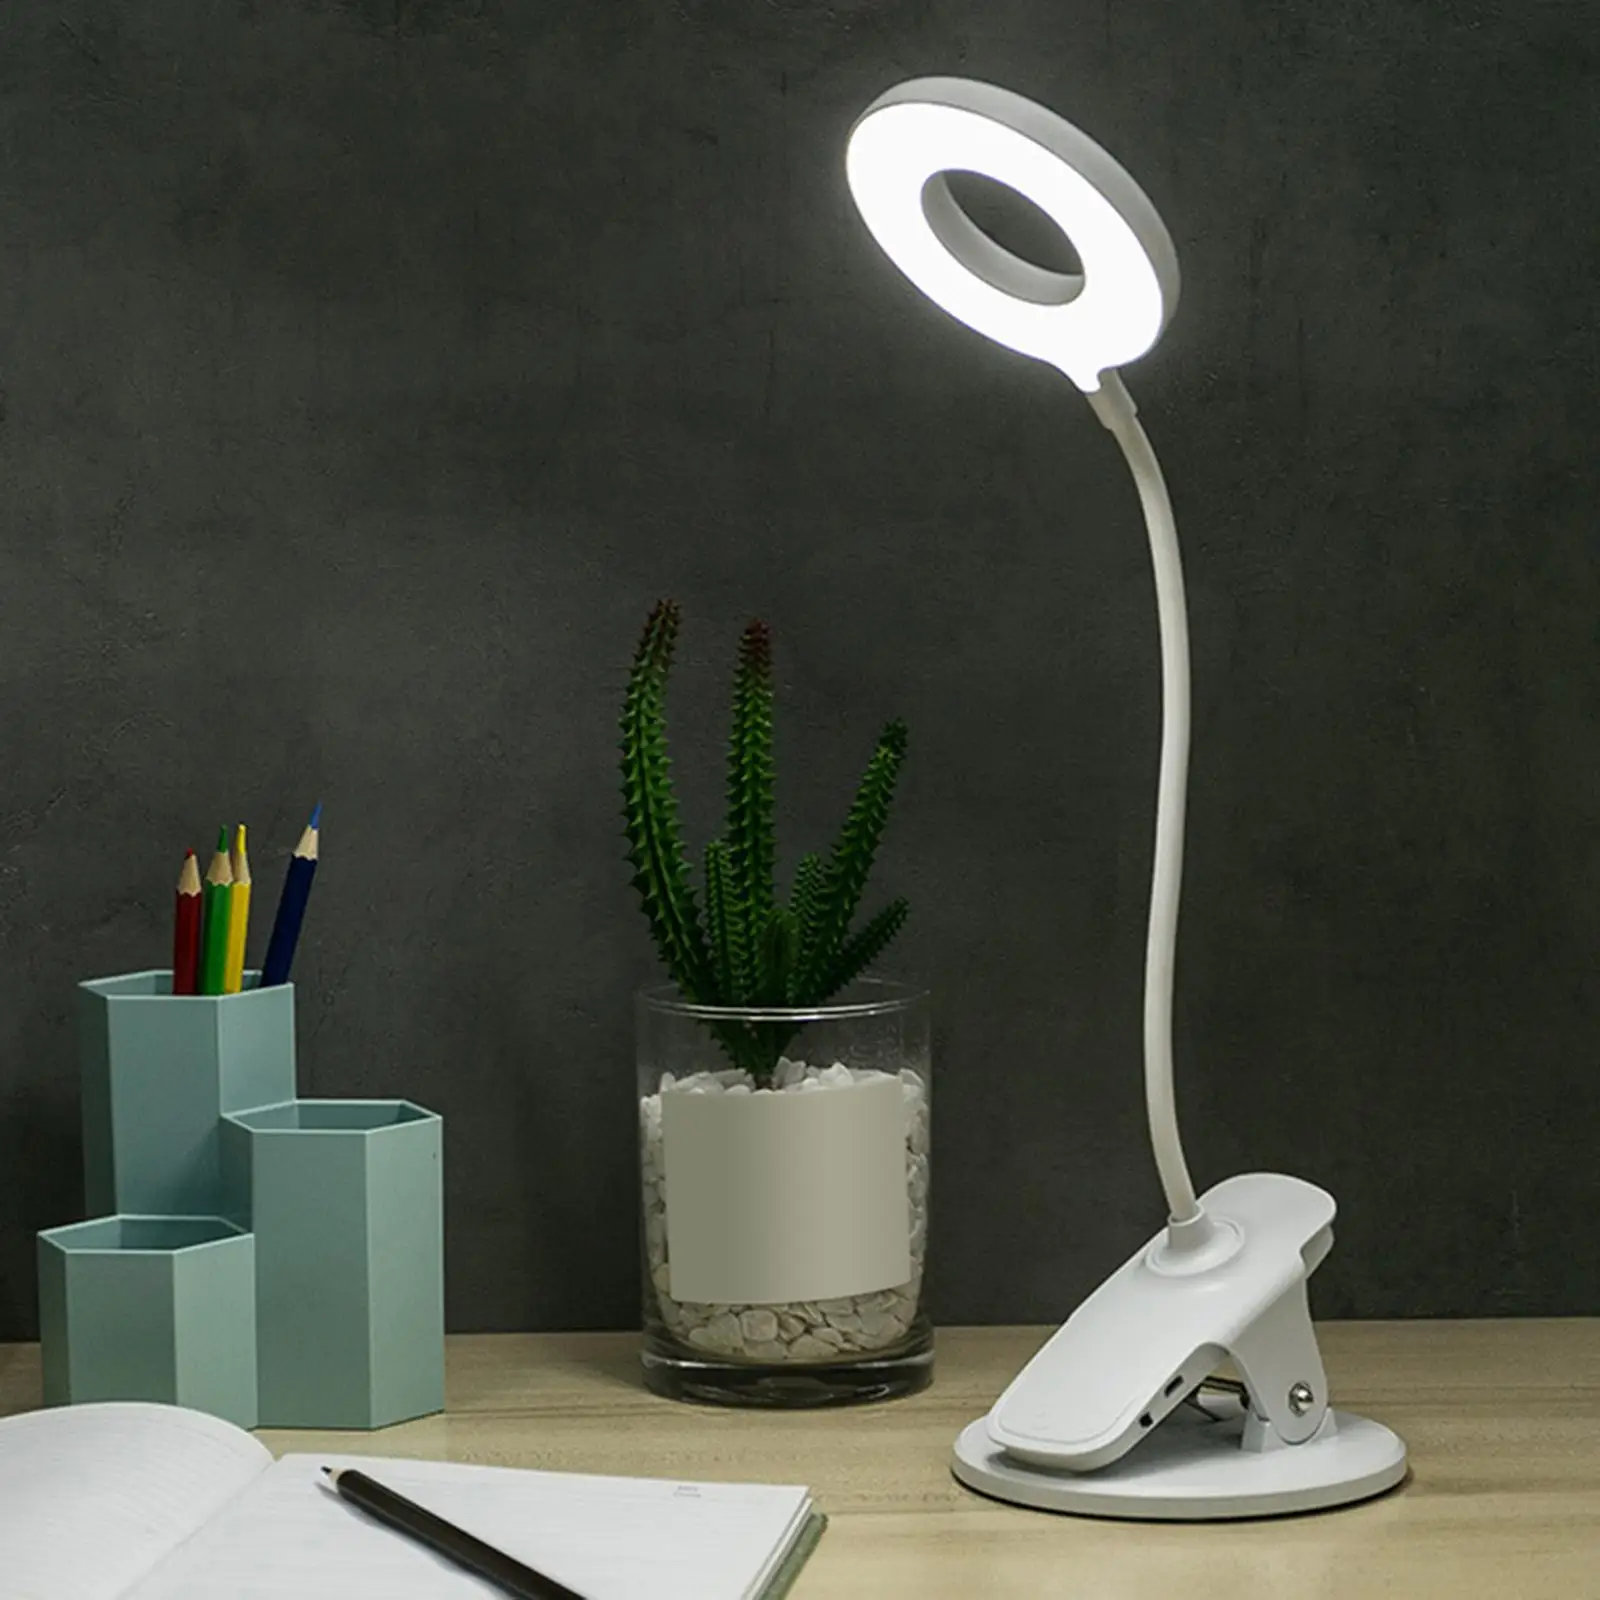 Adjustable Table Light Reading White LED Desk Lamp with Clamp for Headboard Home